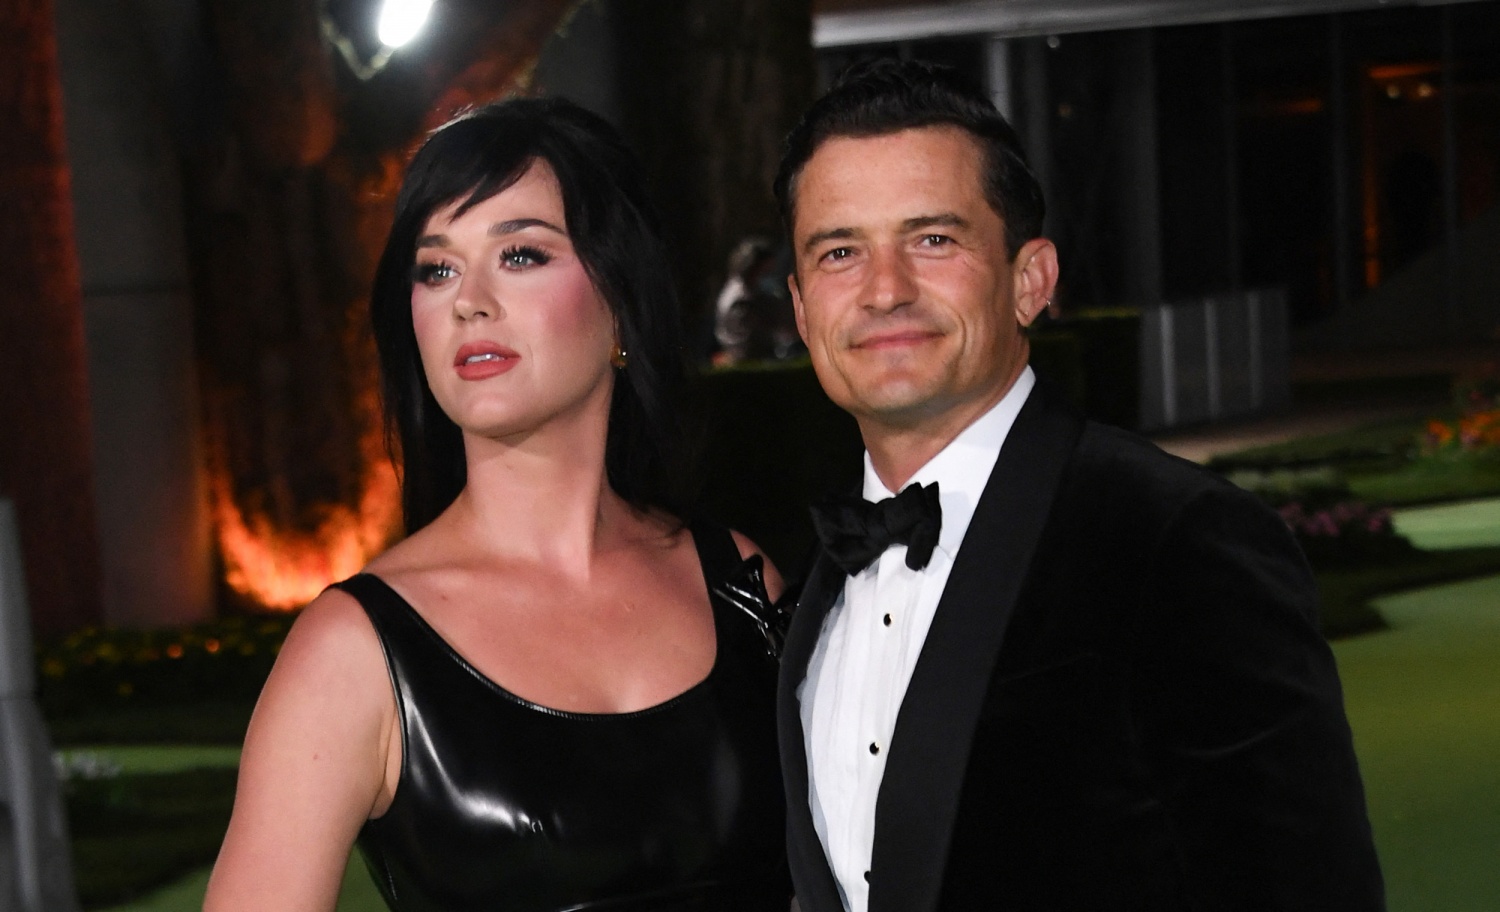 Katy Perry and English actor Orlando Bloom 